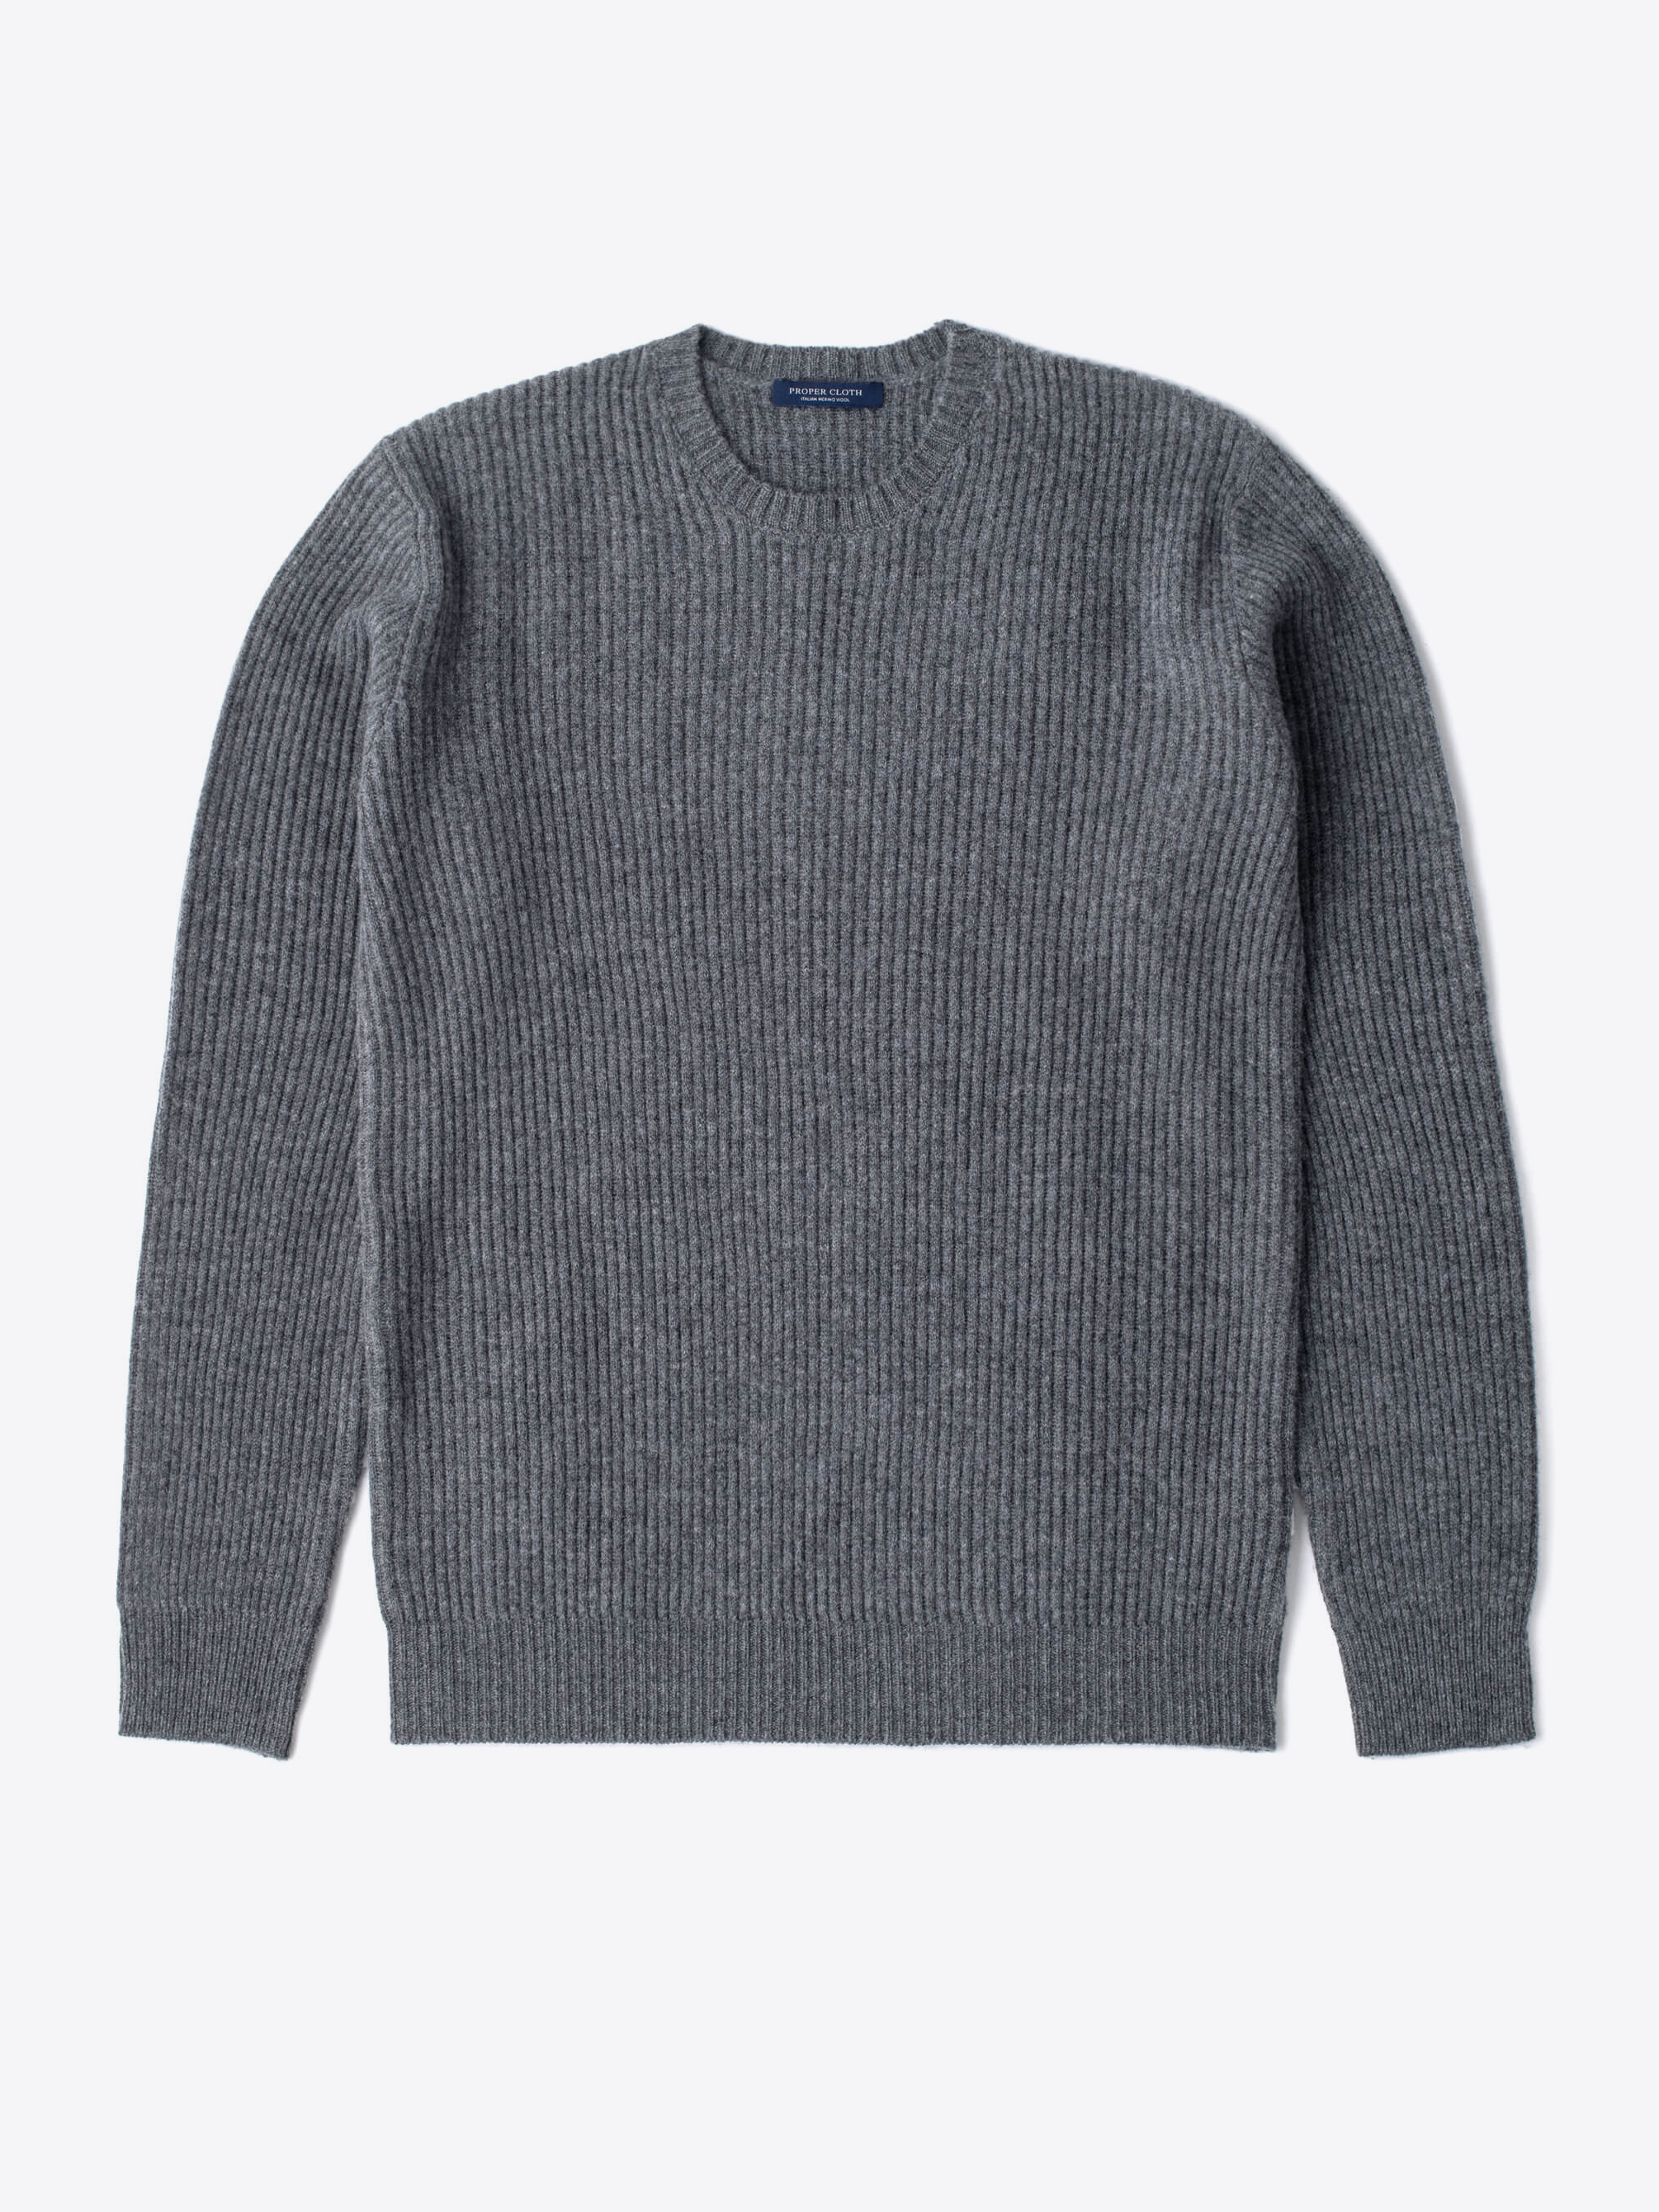 Zoom Image of Grey Ribbed Wool and Cashmere Sweater